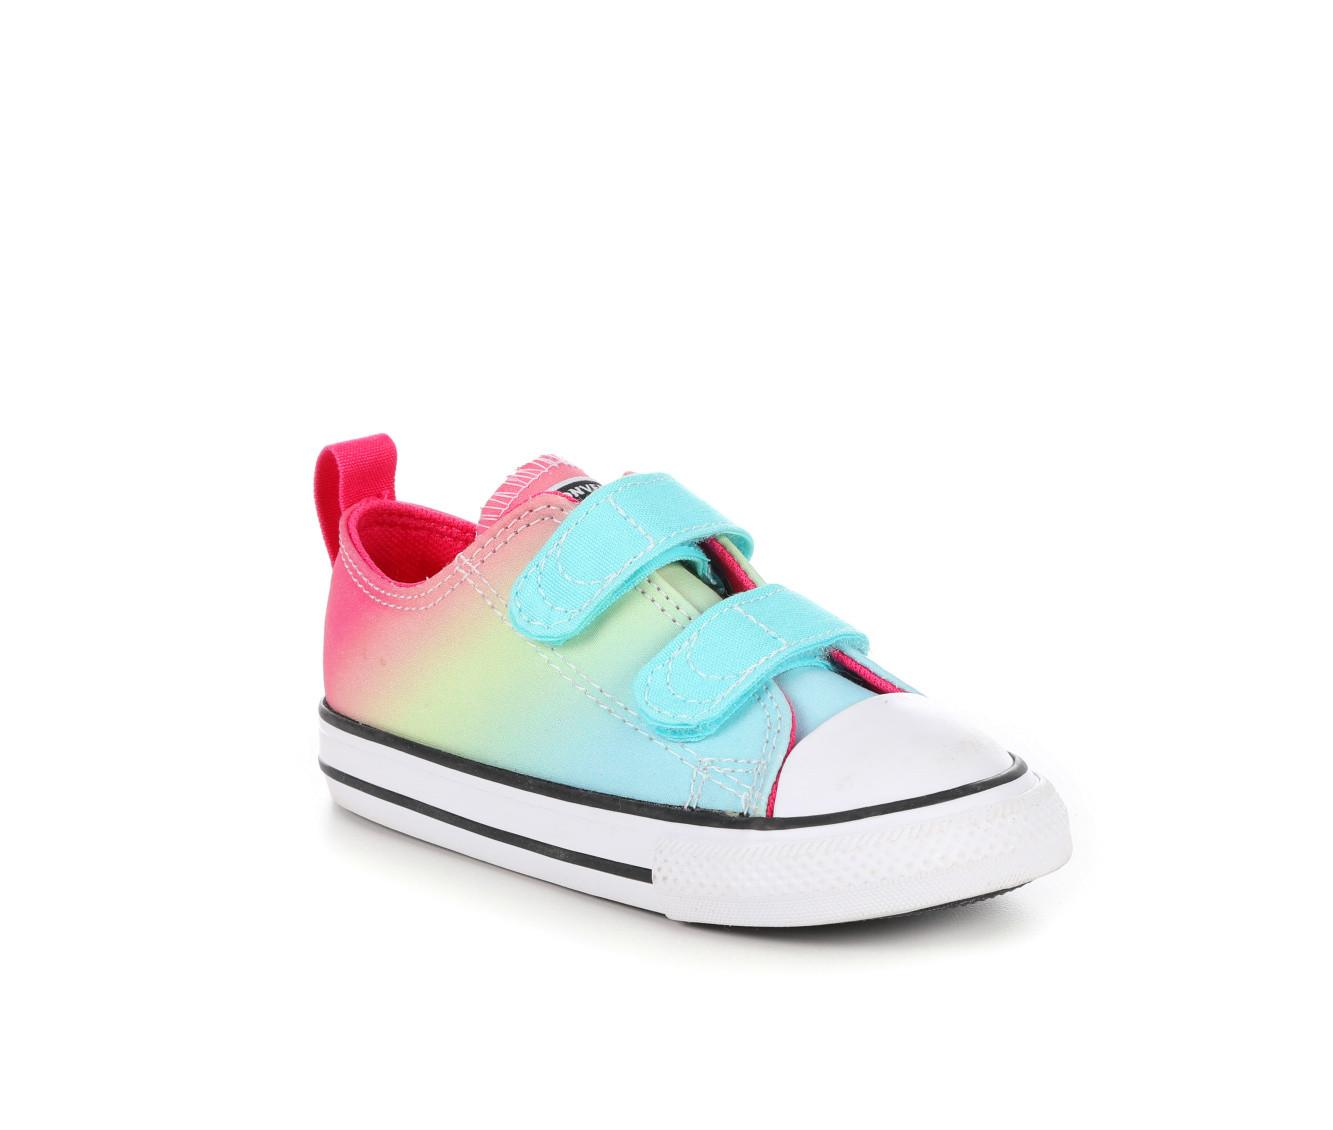 Girls' Converse Infant & Toddler Chuck Taylor All Star 2V Ox Sneakers